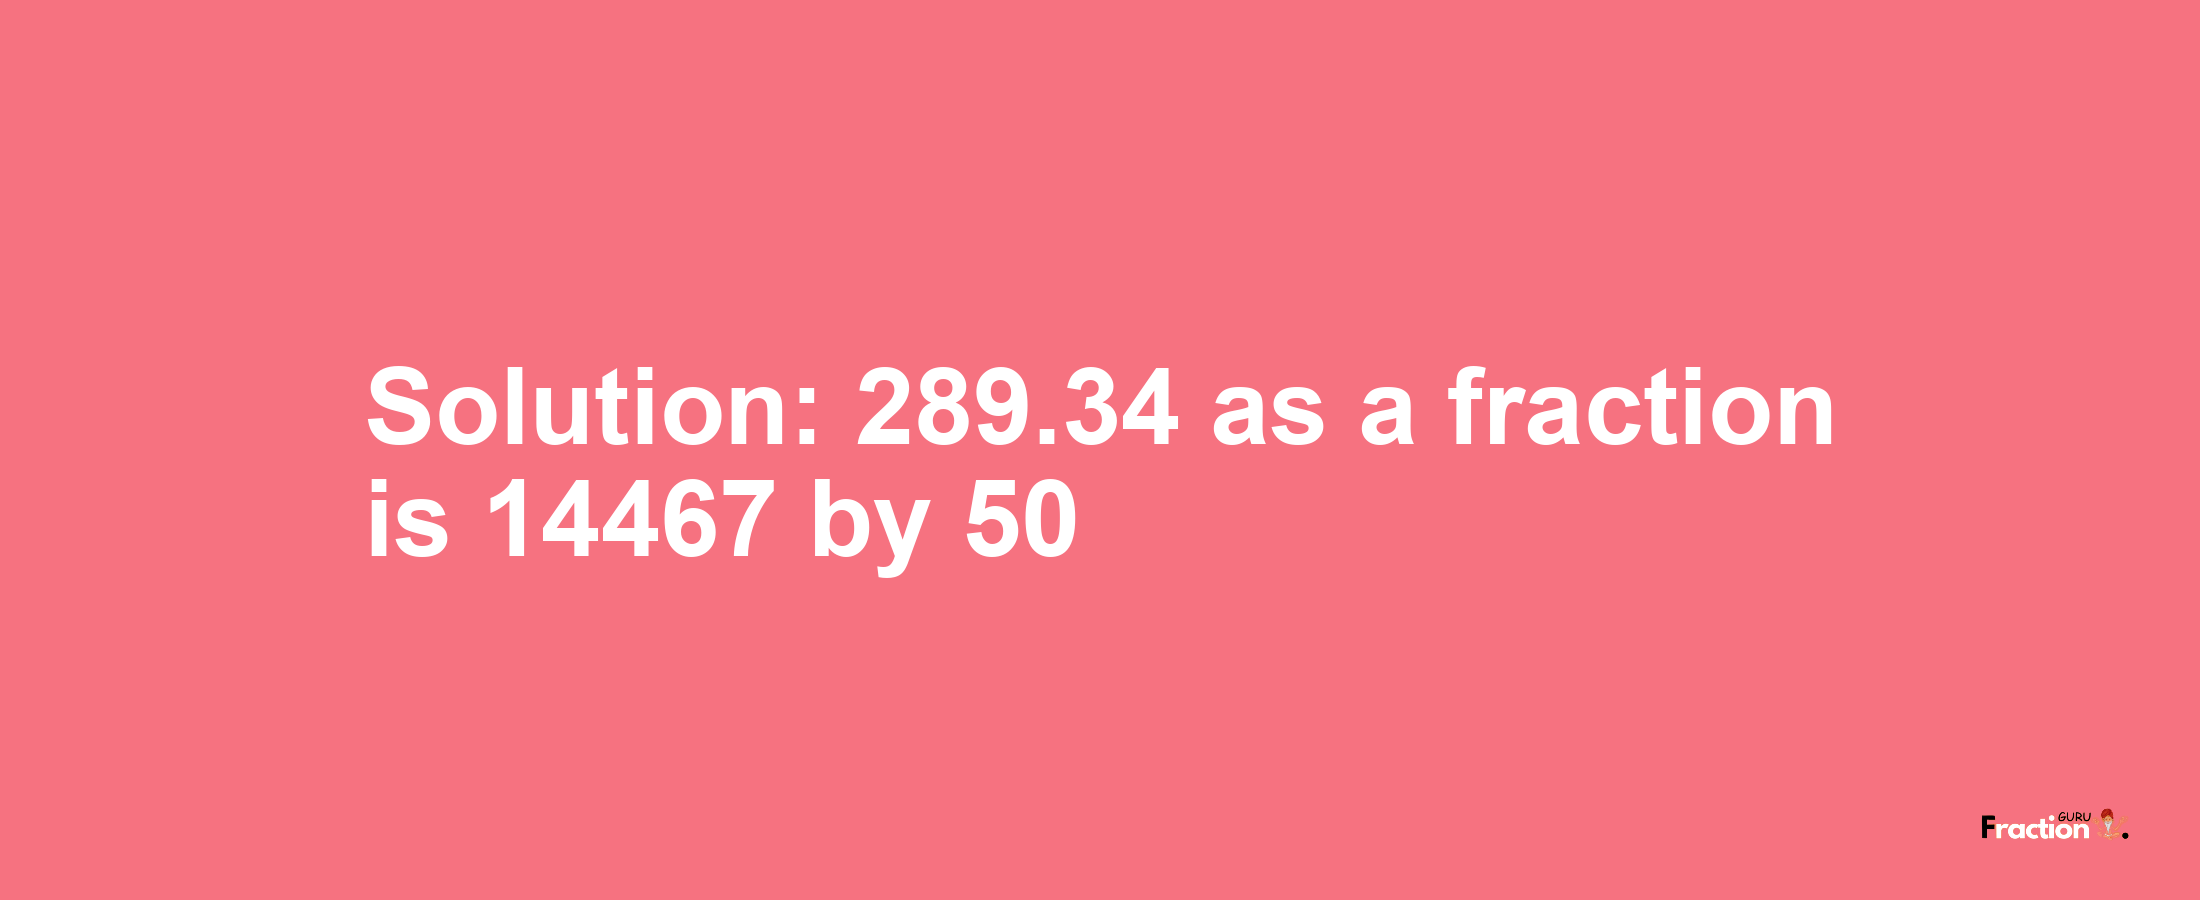 Solution:289.34 as a fraction is 14467/50